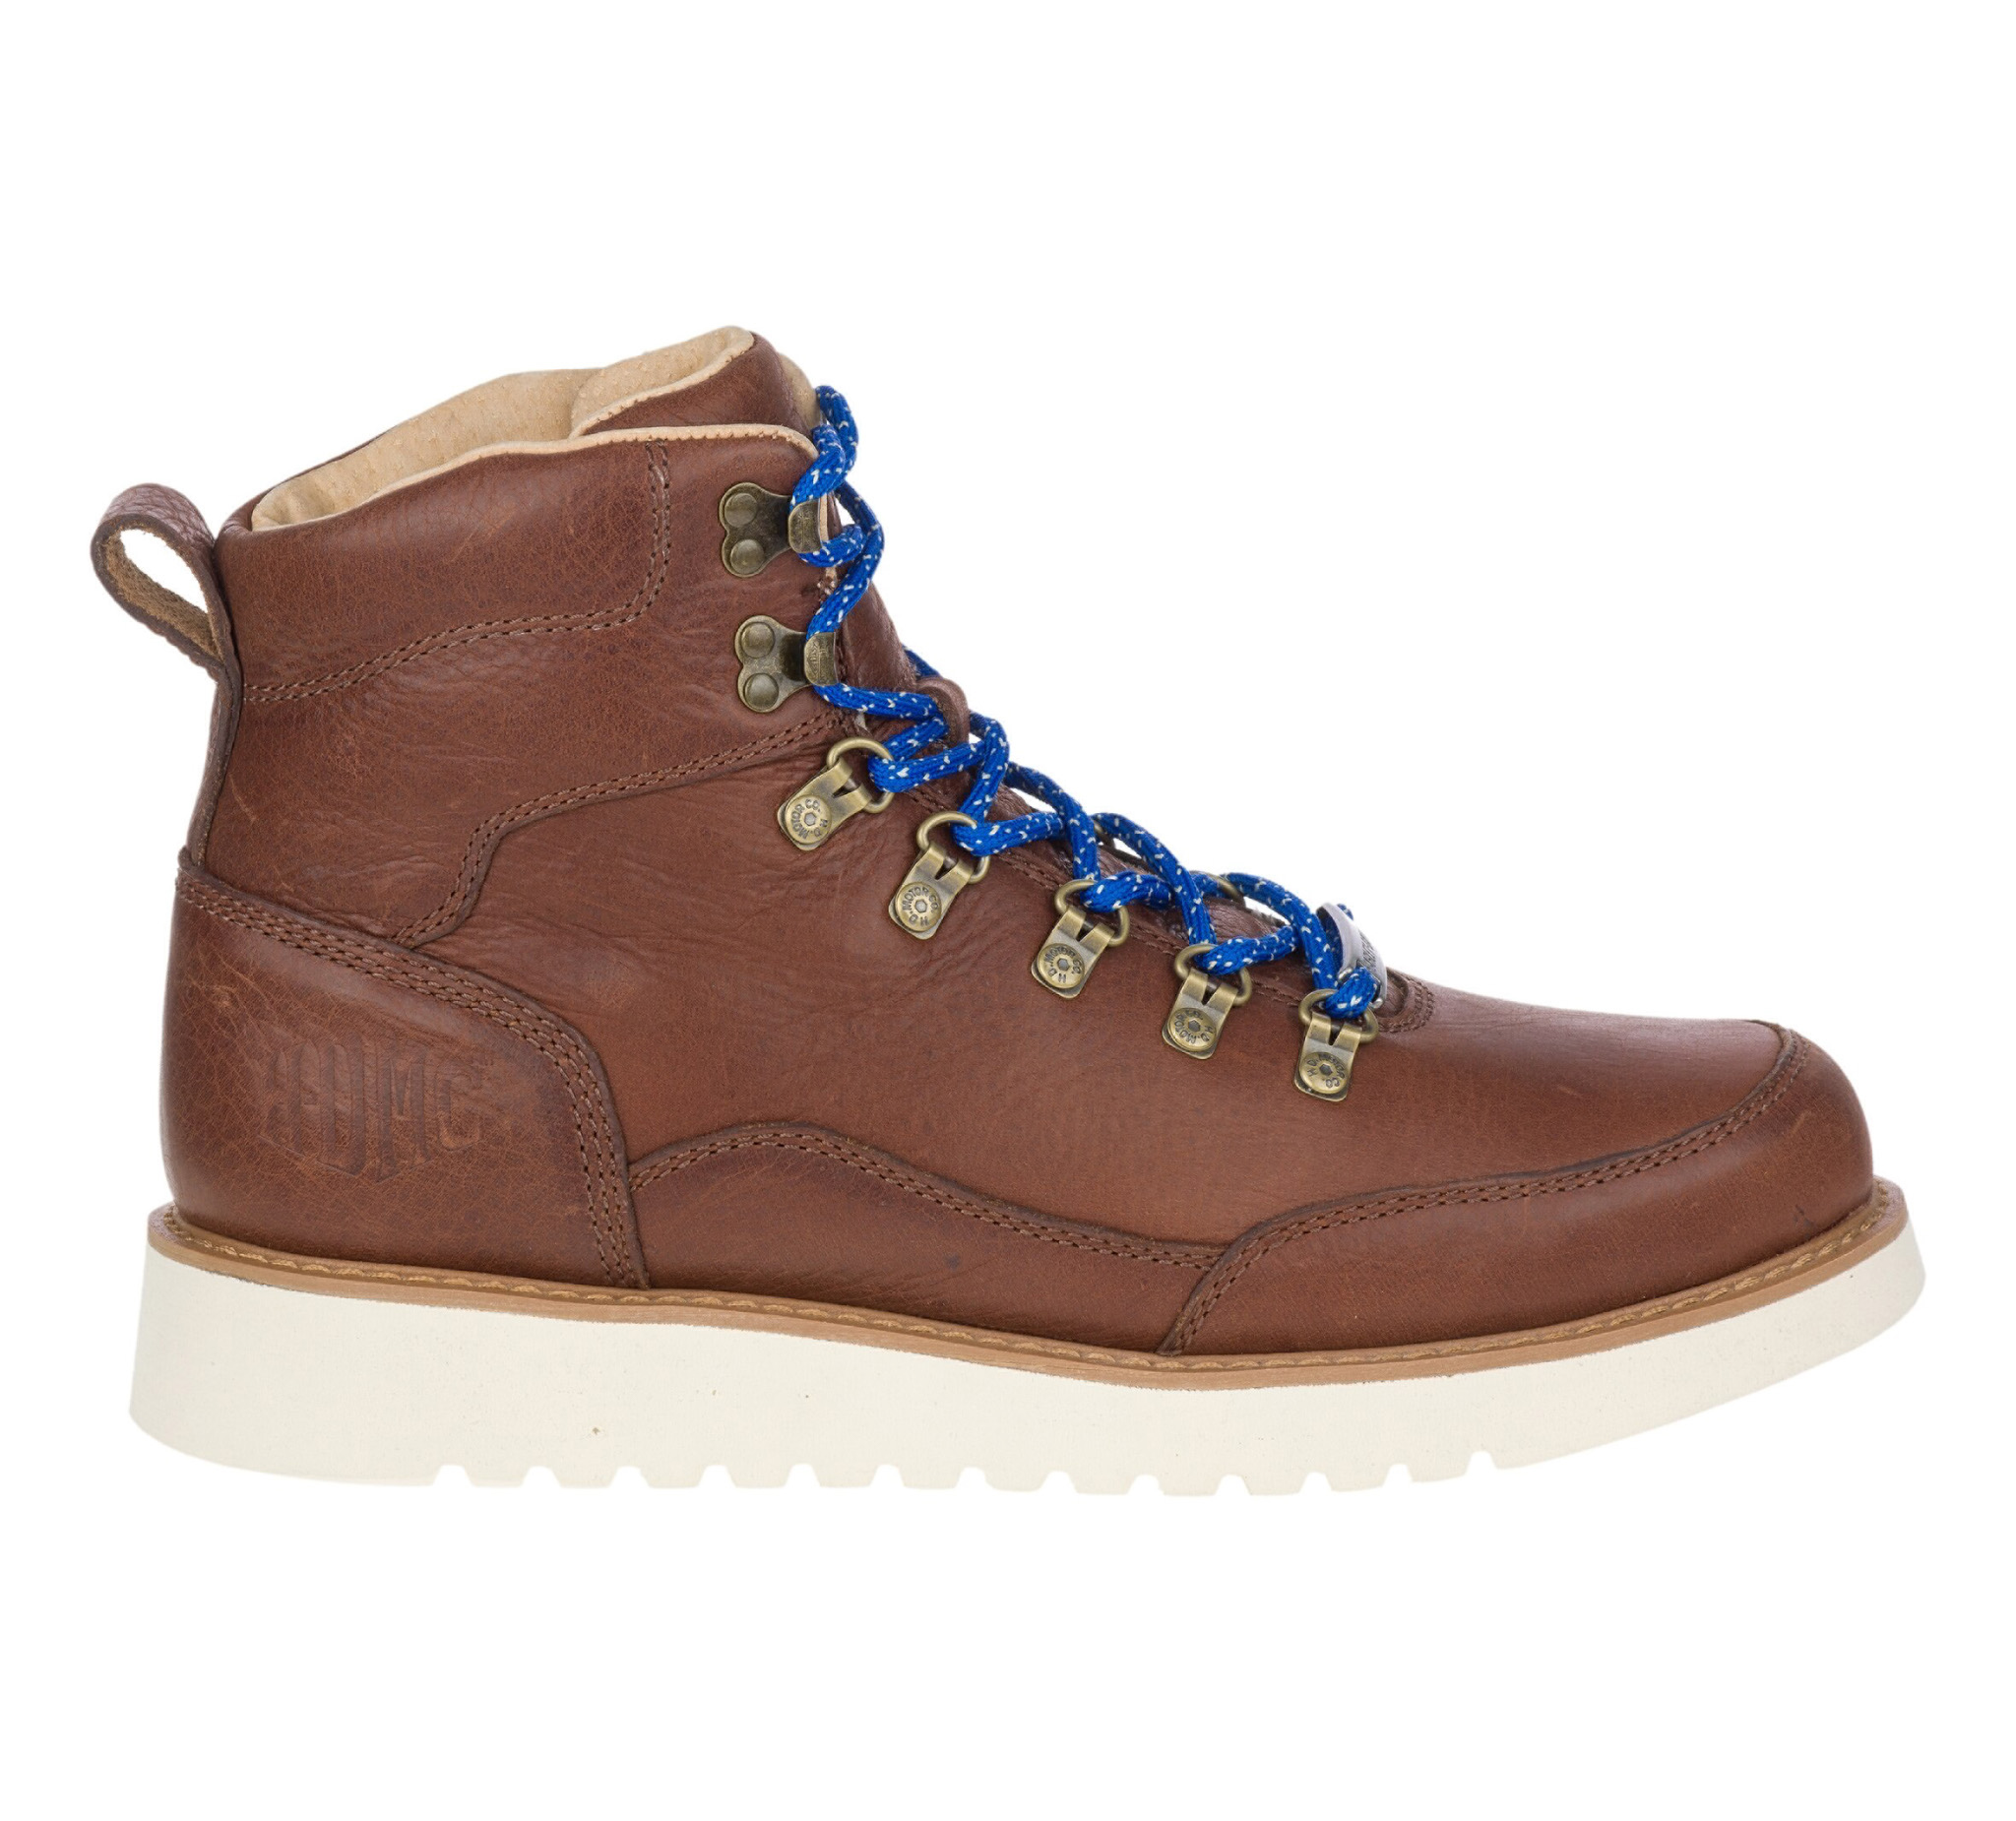 mens brown casual boots